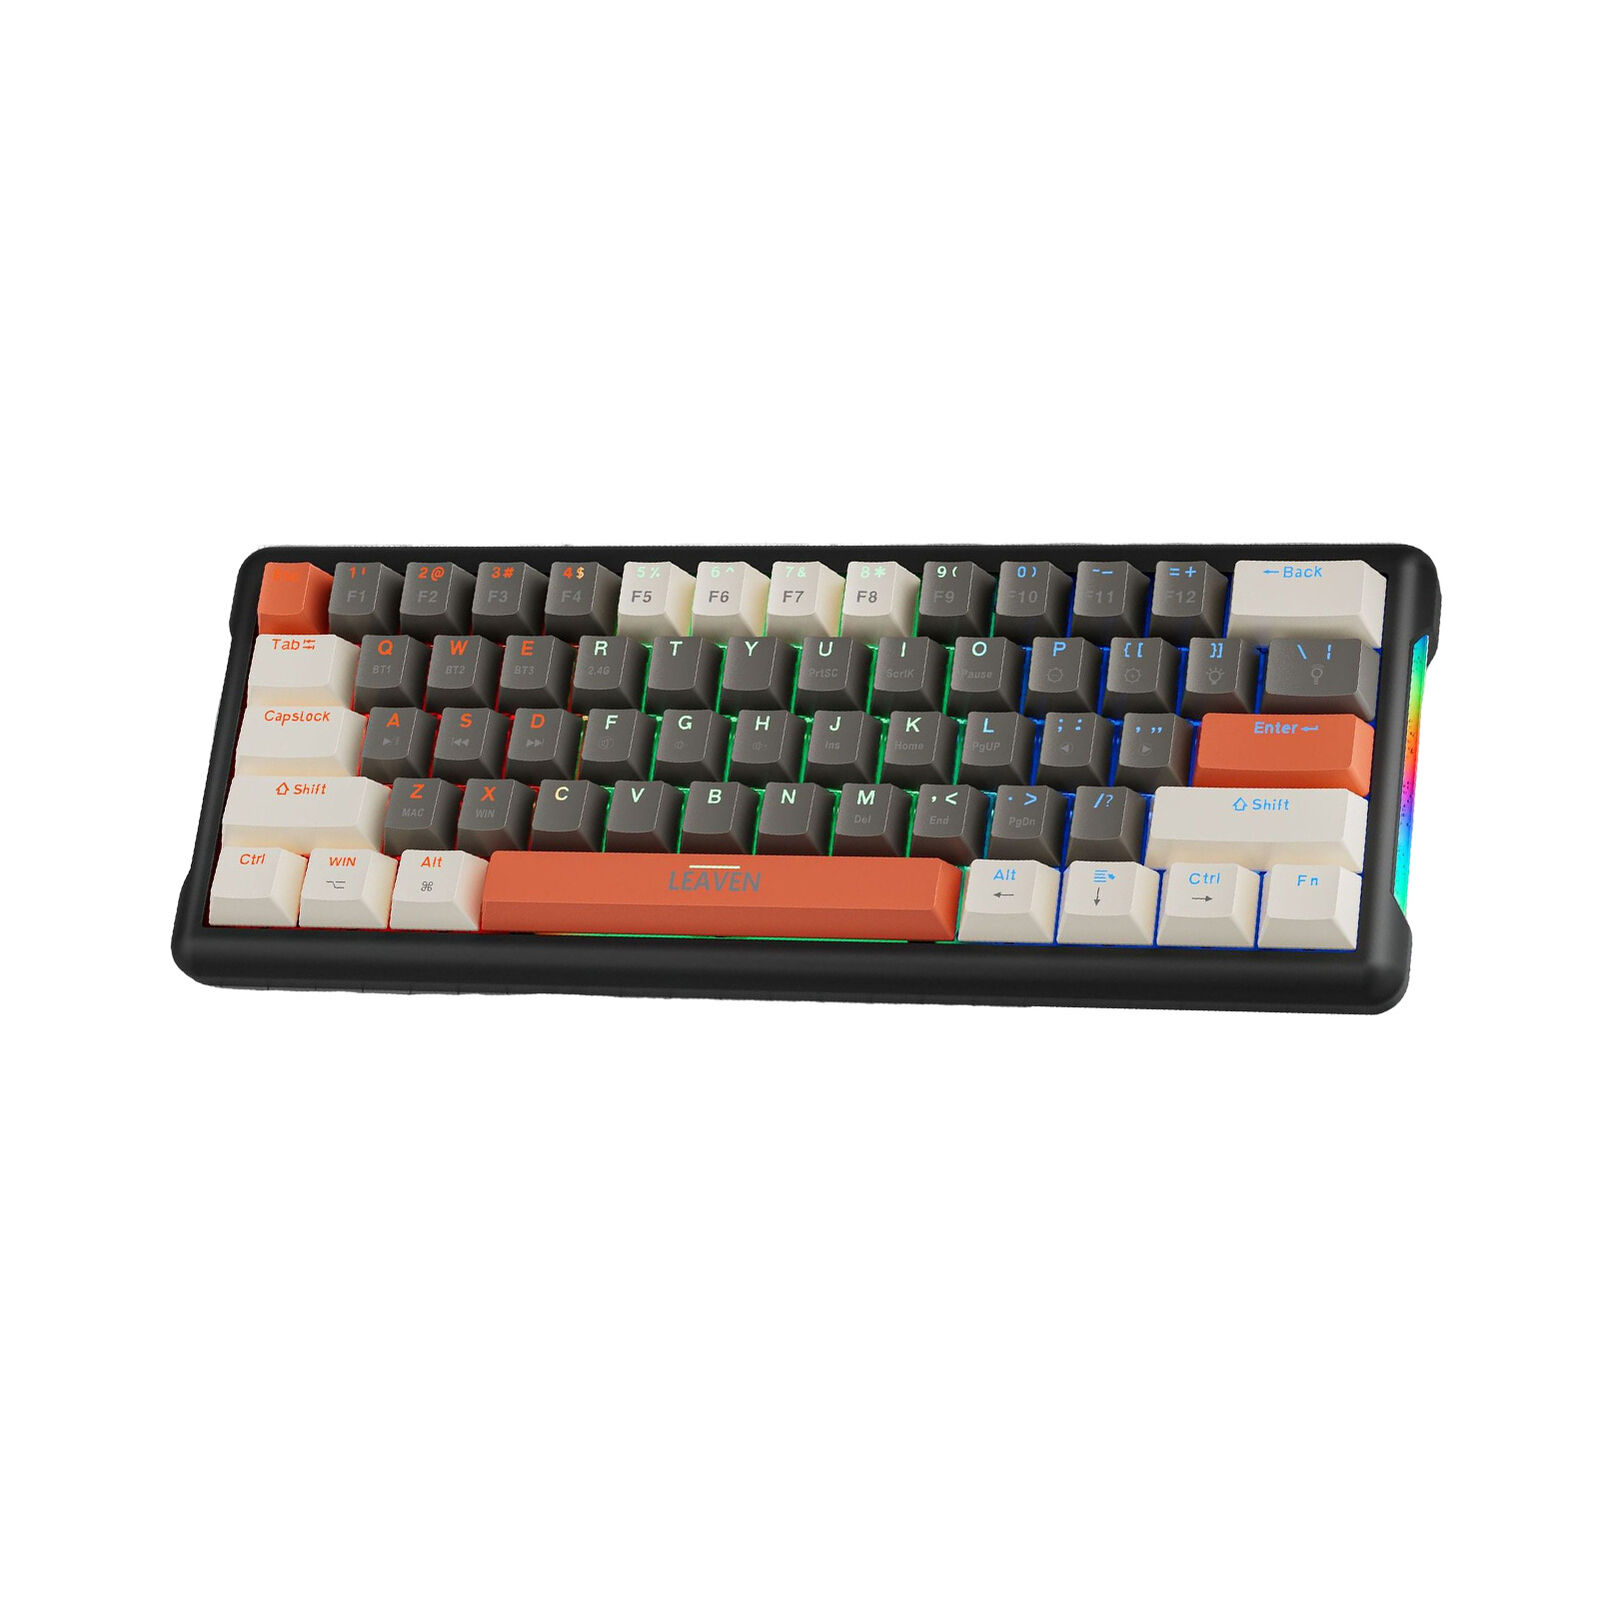 Russian Wired Gaming Keyboard Mechanical Feel LED Backlit Keyboards new